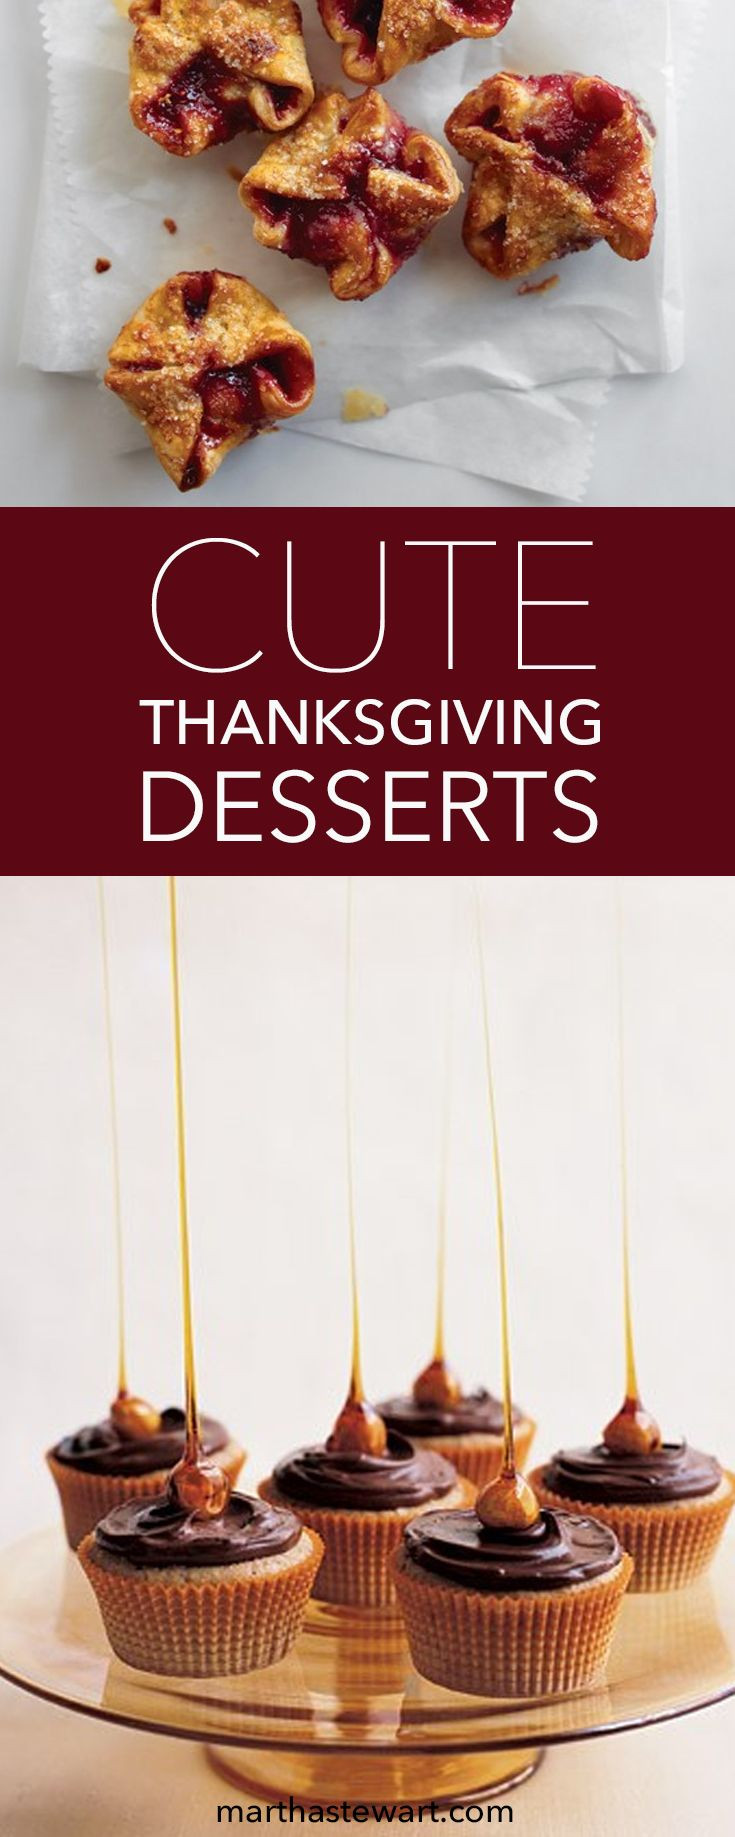 Cute Thanksgiving Desserts
 12 Cute Thanksgiving Desserts That Guests Will Gobble Up